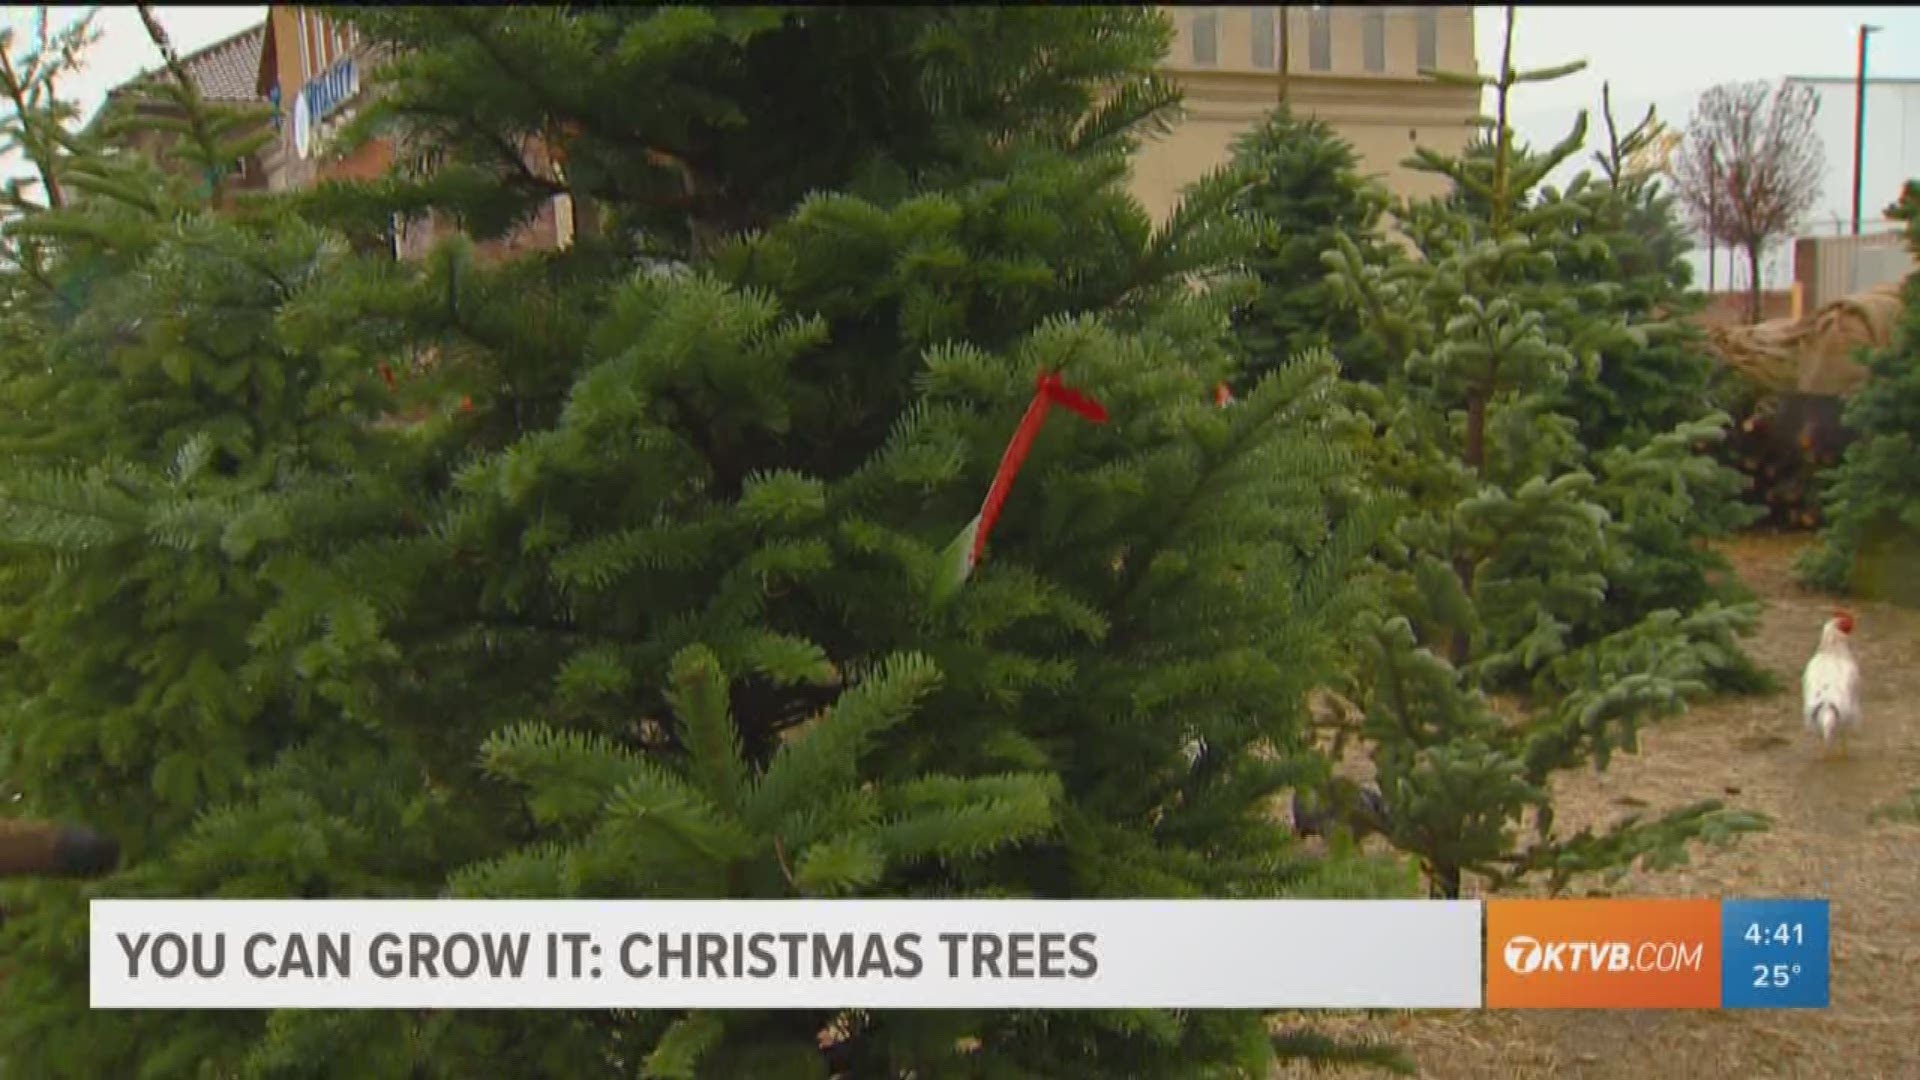 Jim Duthie tells us about the most popular types of Christmas trees.